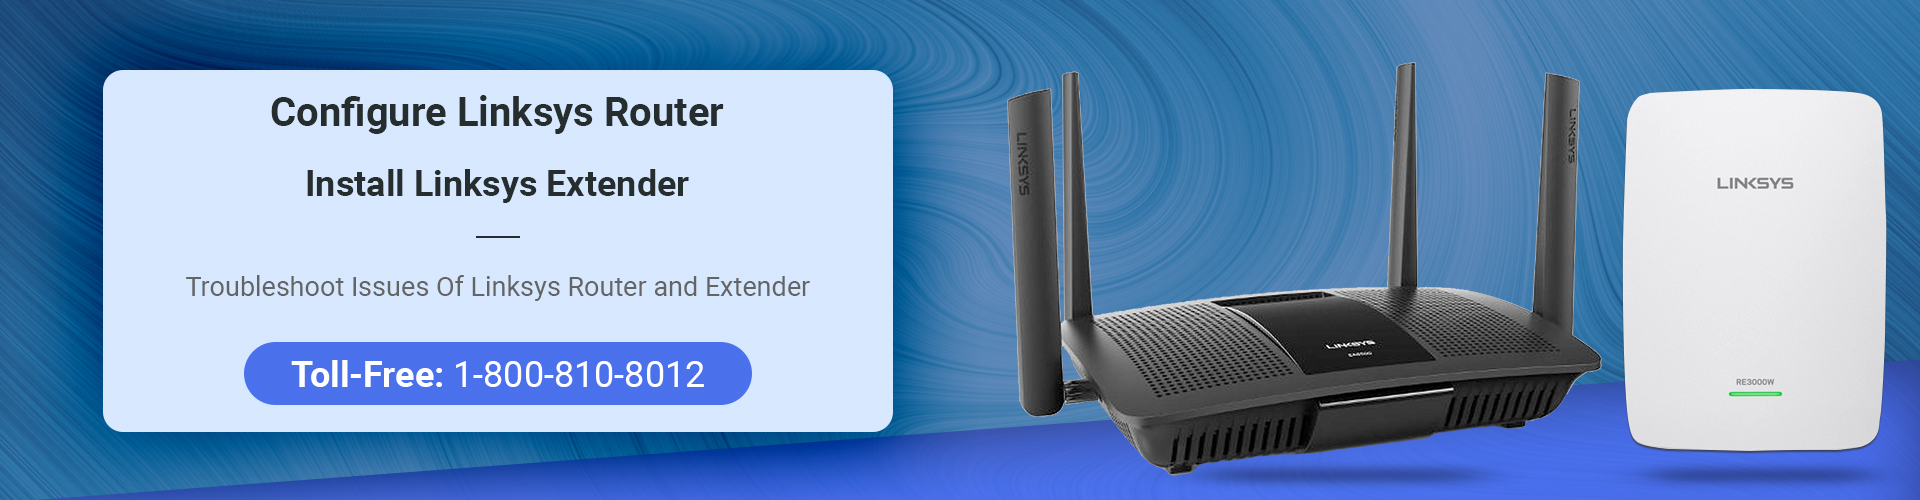 setup linksys router without cd